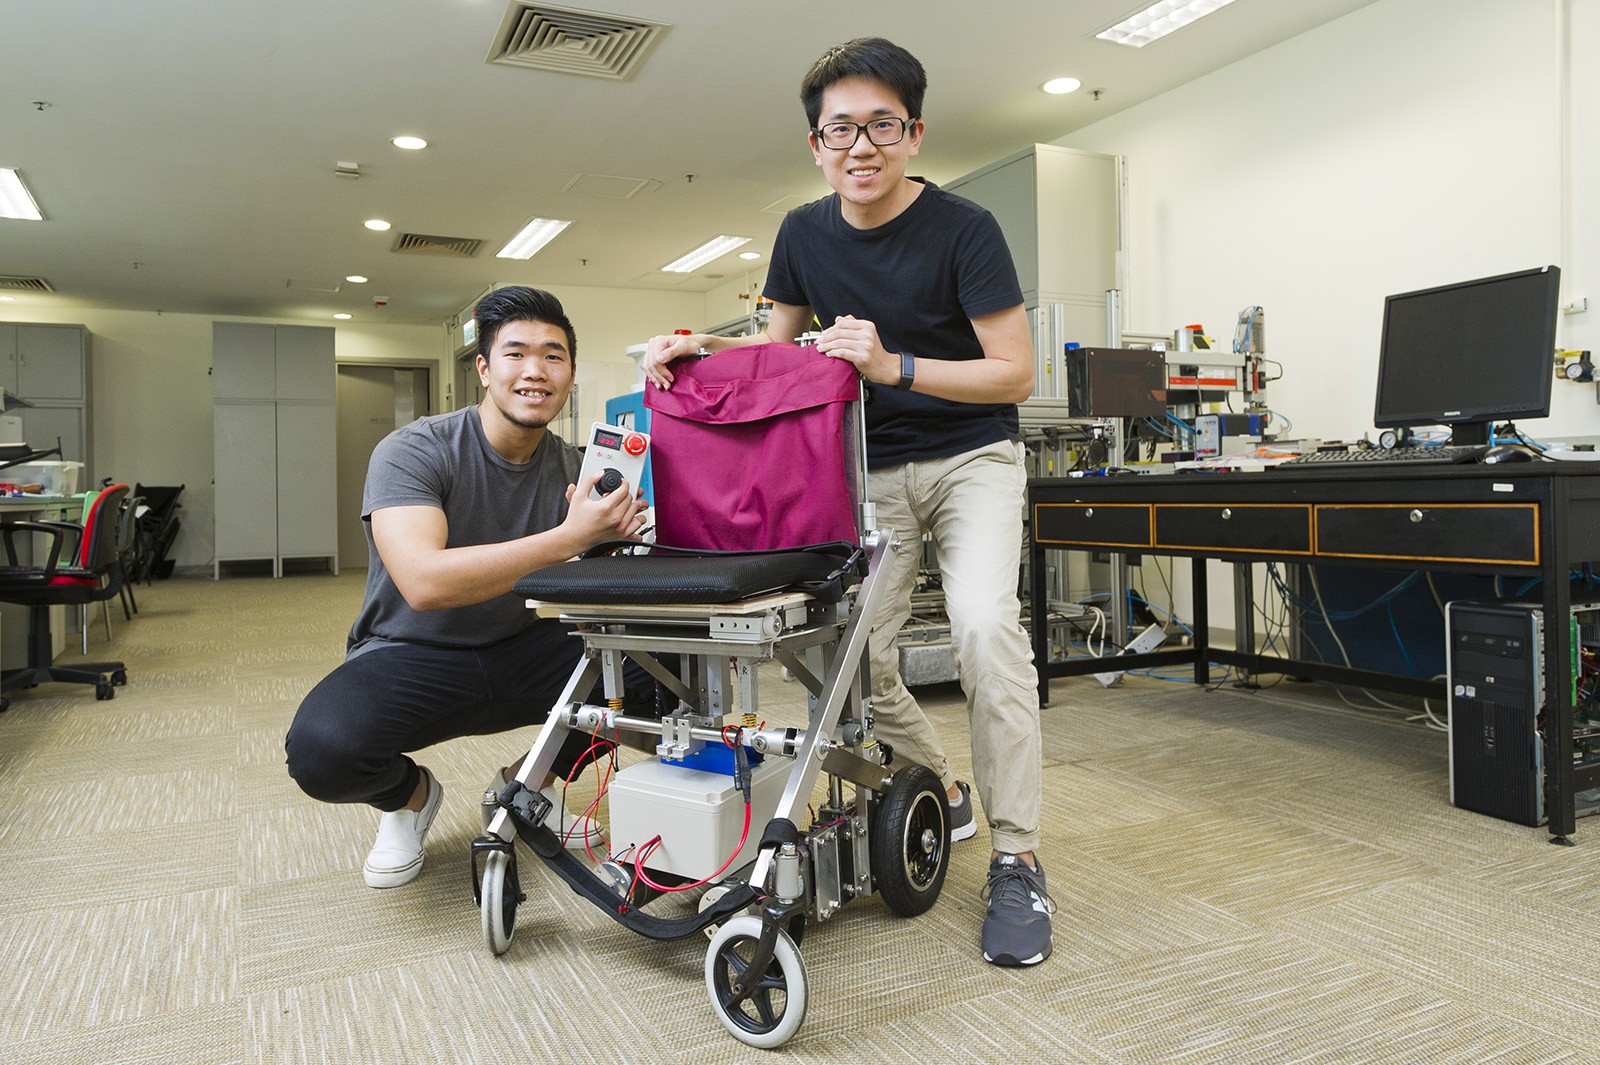 Transformable wheelchair developed by Chan Tsz-lung (left) and his teammate Lam Wah-shing.